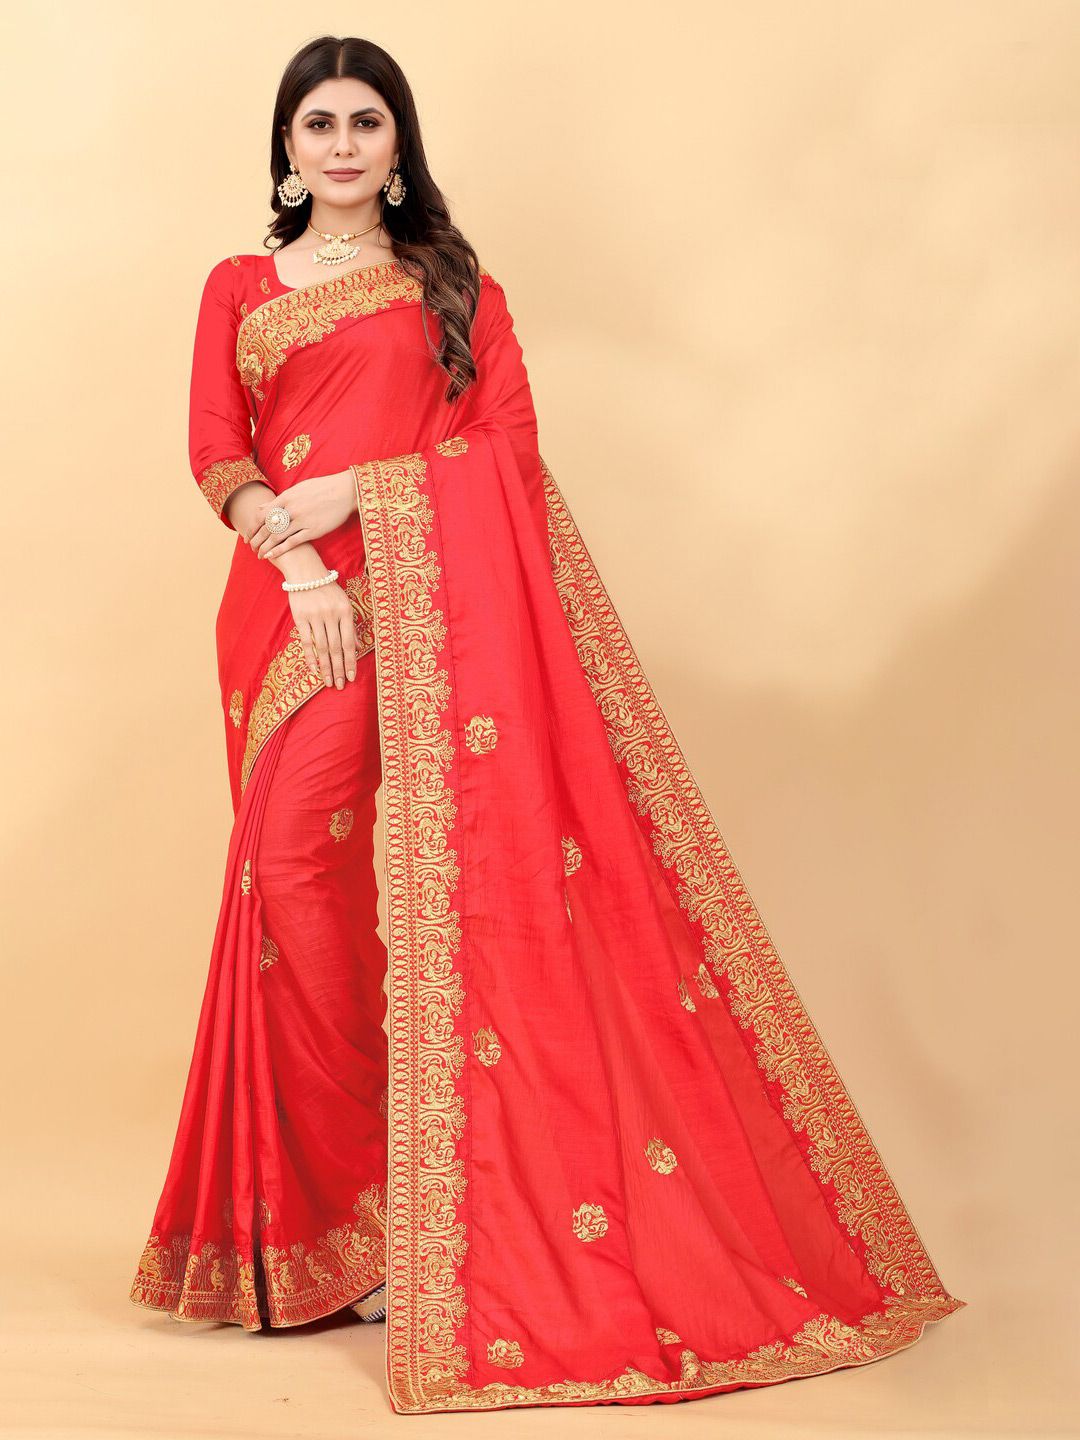 Monrav Red & Gold-Toned Floral Embroidered Silk Blend Saree Price in India